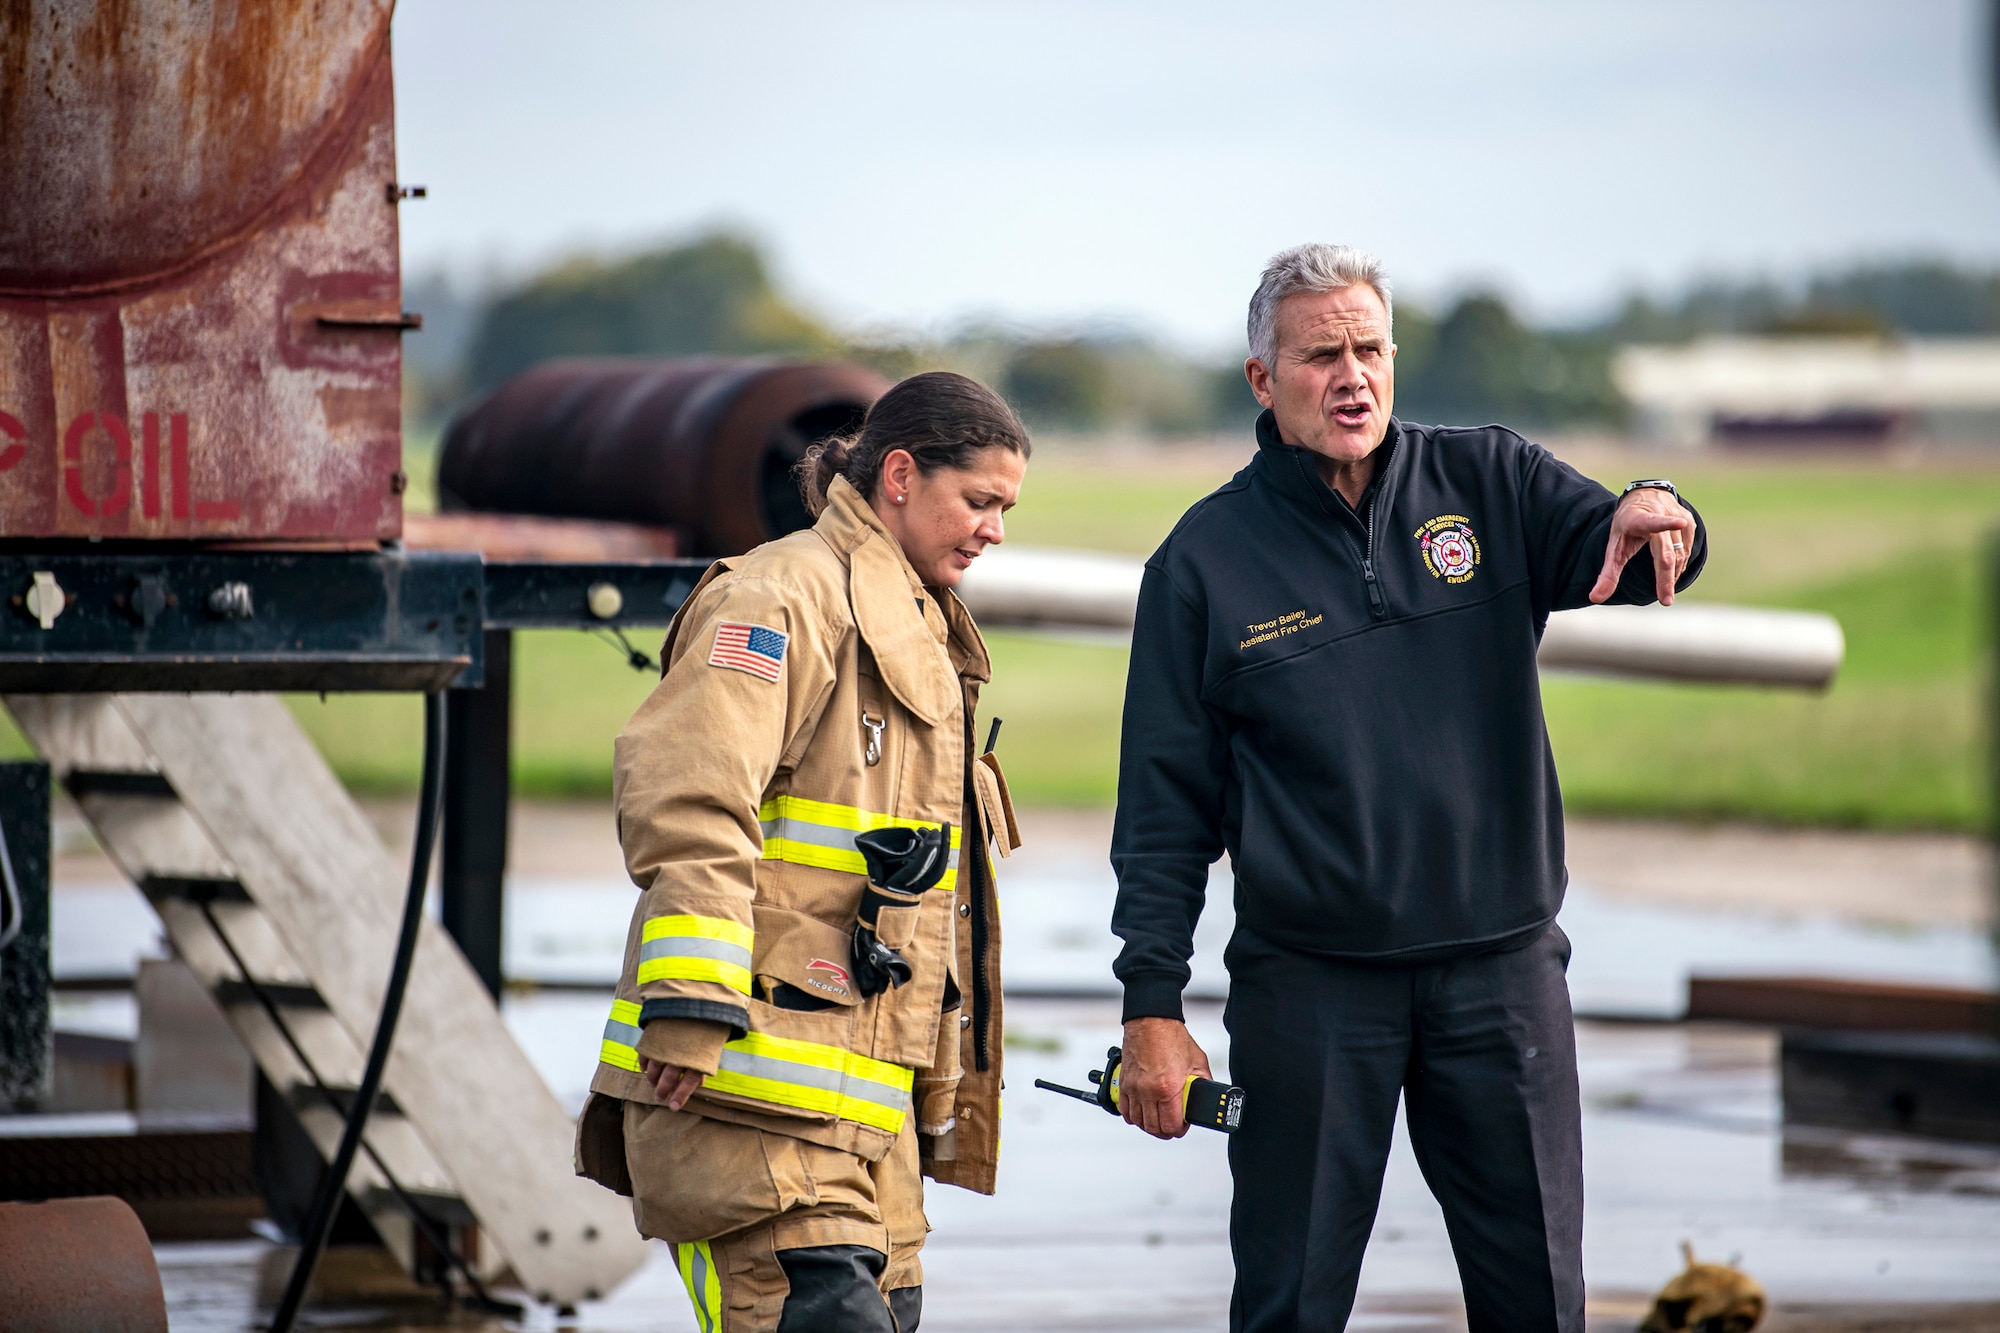 A firefighter from the 422d Fire Emergency Services speaks with Trevor Bailey, 422d FES assistant fire chief, following a live-fire training exercise at RAF Fairford, England, Oct. 3, 2022. Firefighters from the 422d FES, are required to complete live-fire training bi-annualy to test thief overall readiness and ability to properly extinguish an aircraft fire. (U.S. Air Force photo by Staff Sgt. Eugene Oliver)